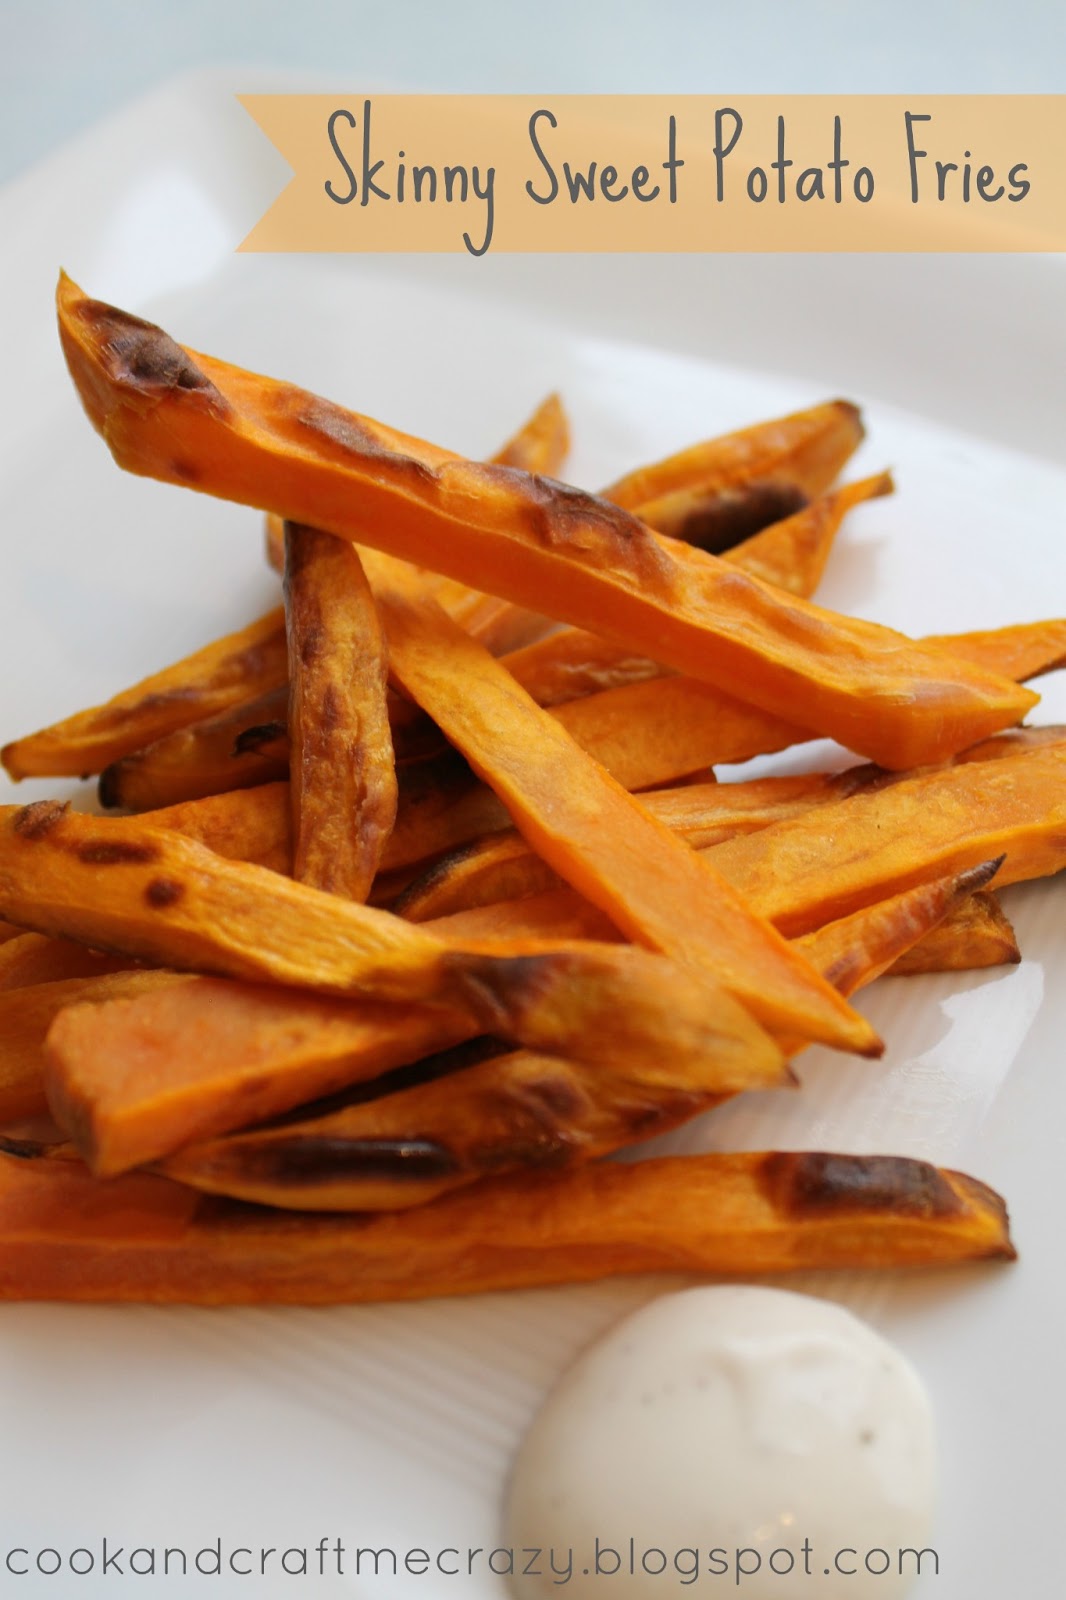 Cook and Craft Me Crazy: Skinny Sweet Potato Fries